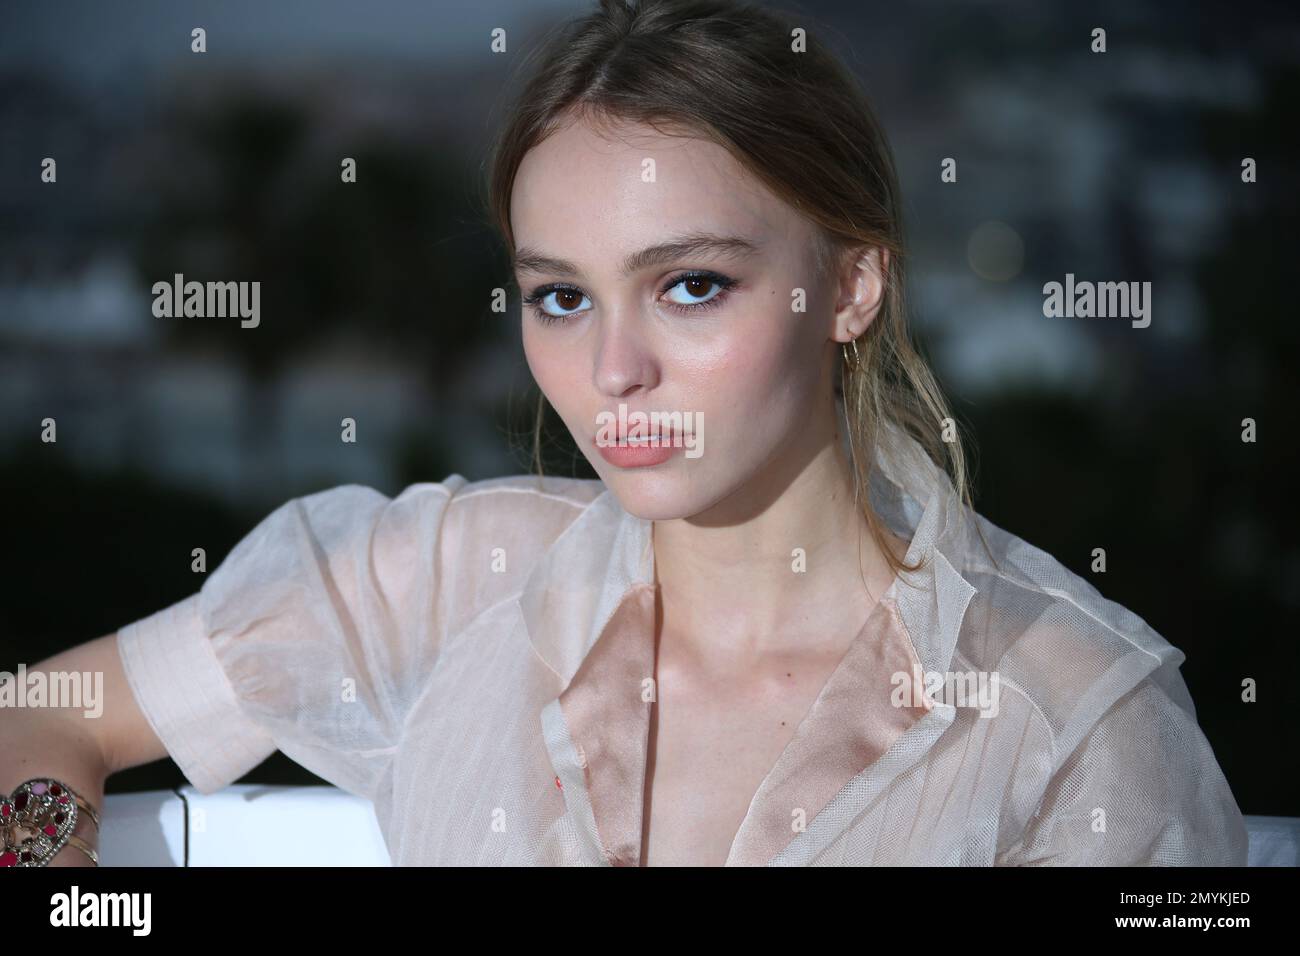 Who is Lily-Rose Depp on The Idol? Age, height, modeling career